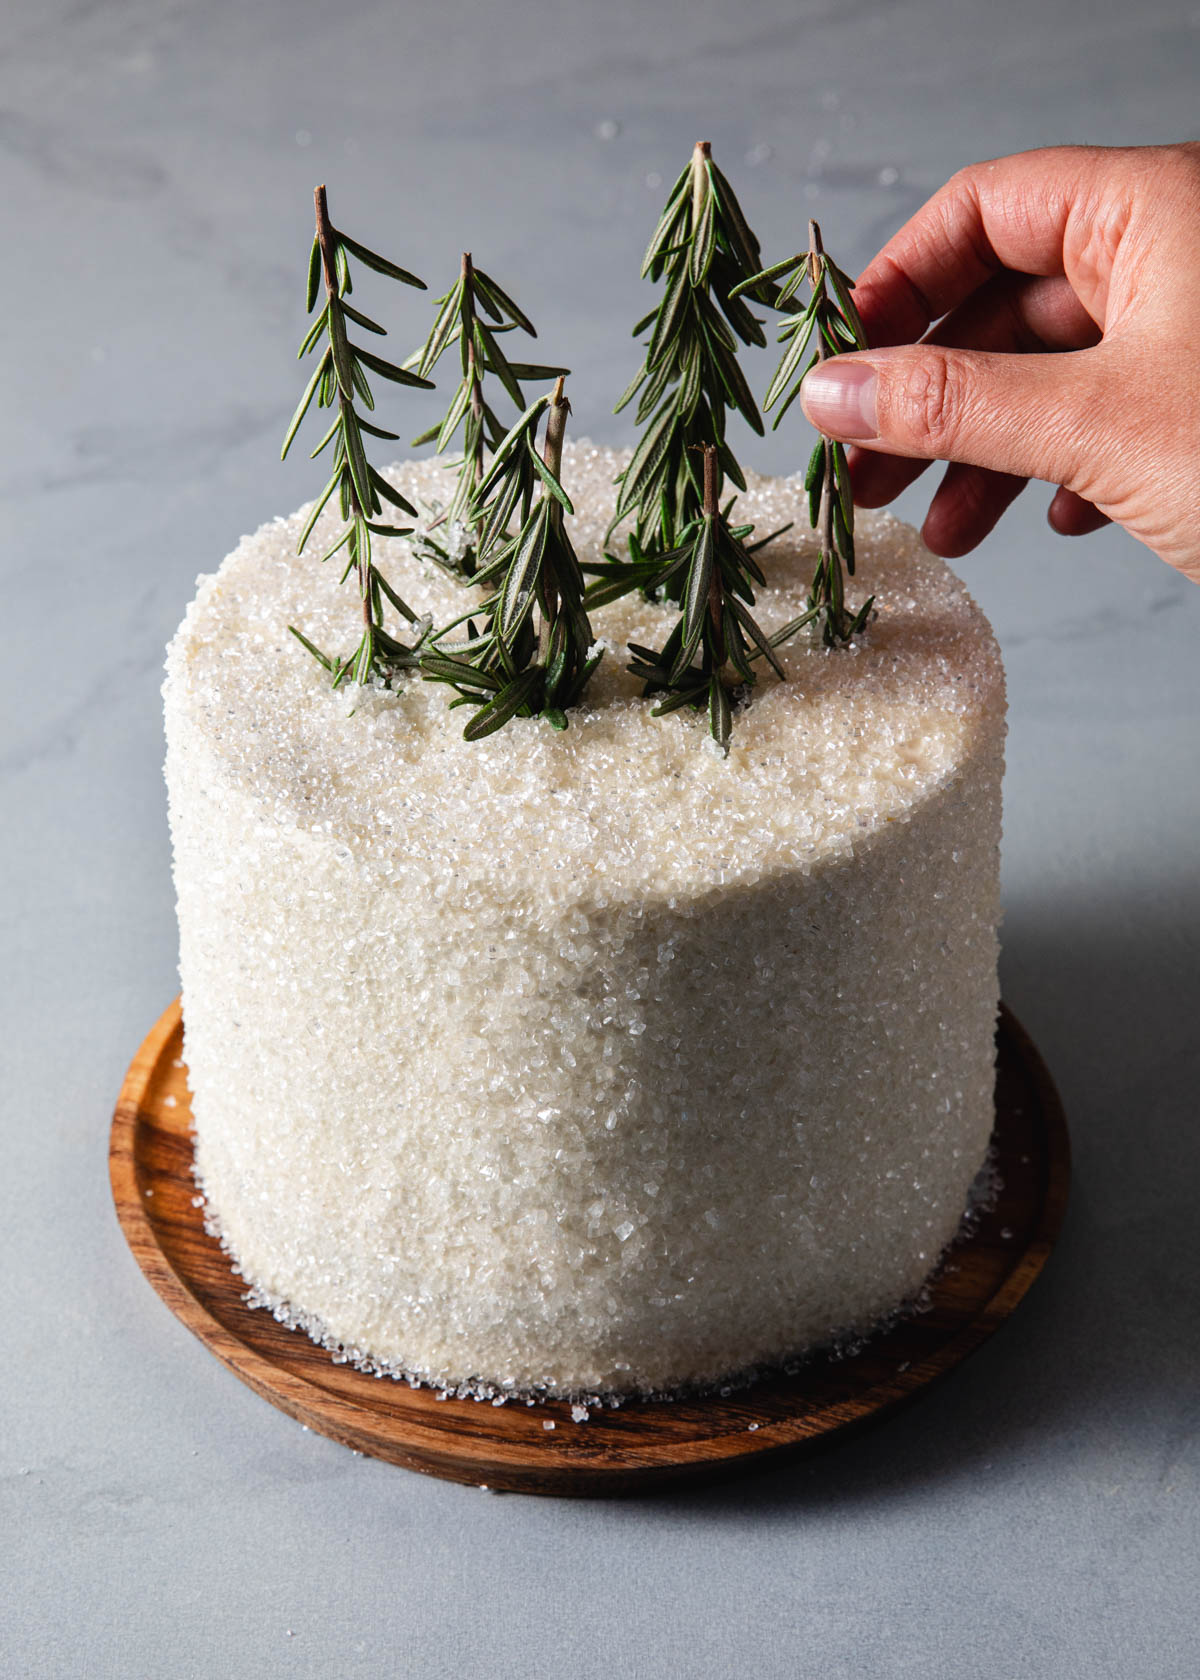 Placing rosemary tress on top of a chocolate peppermint cake